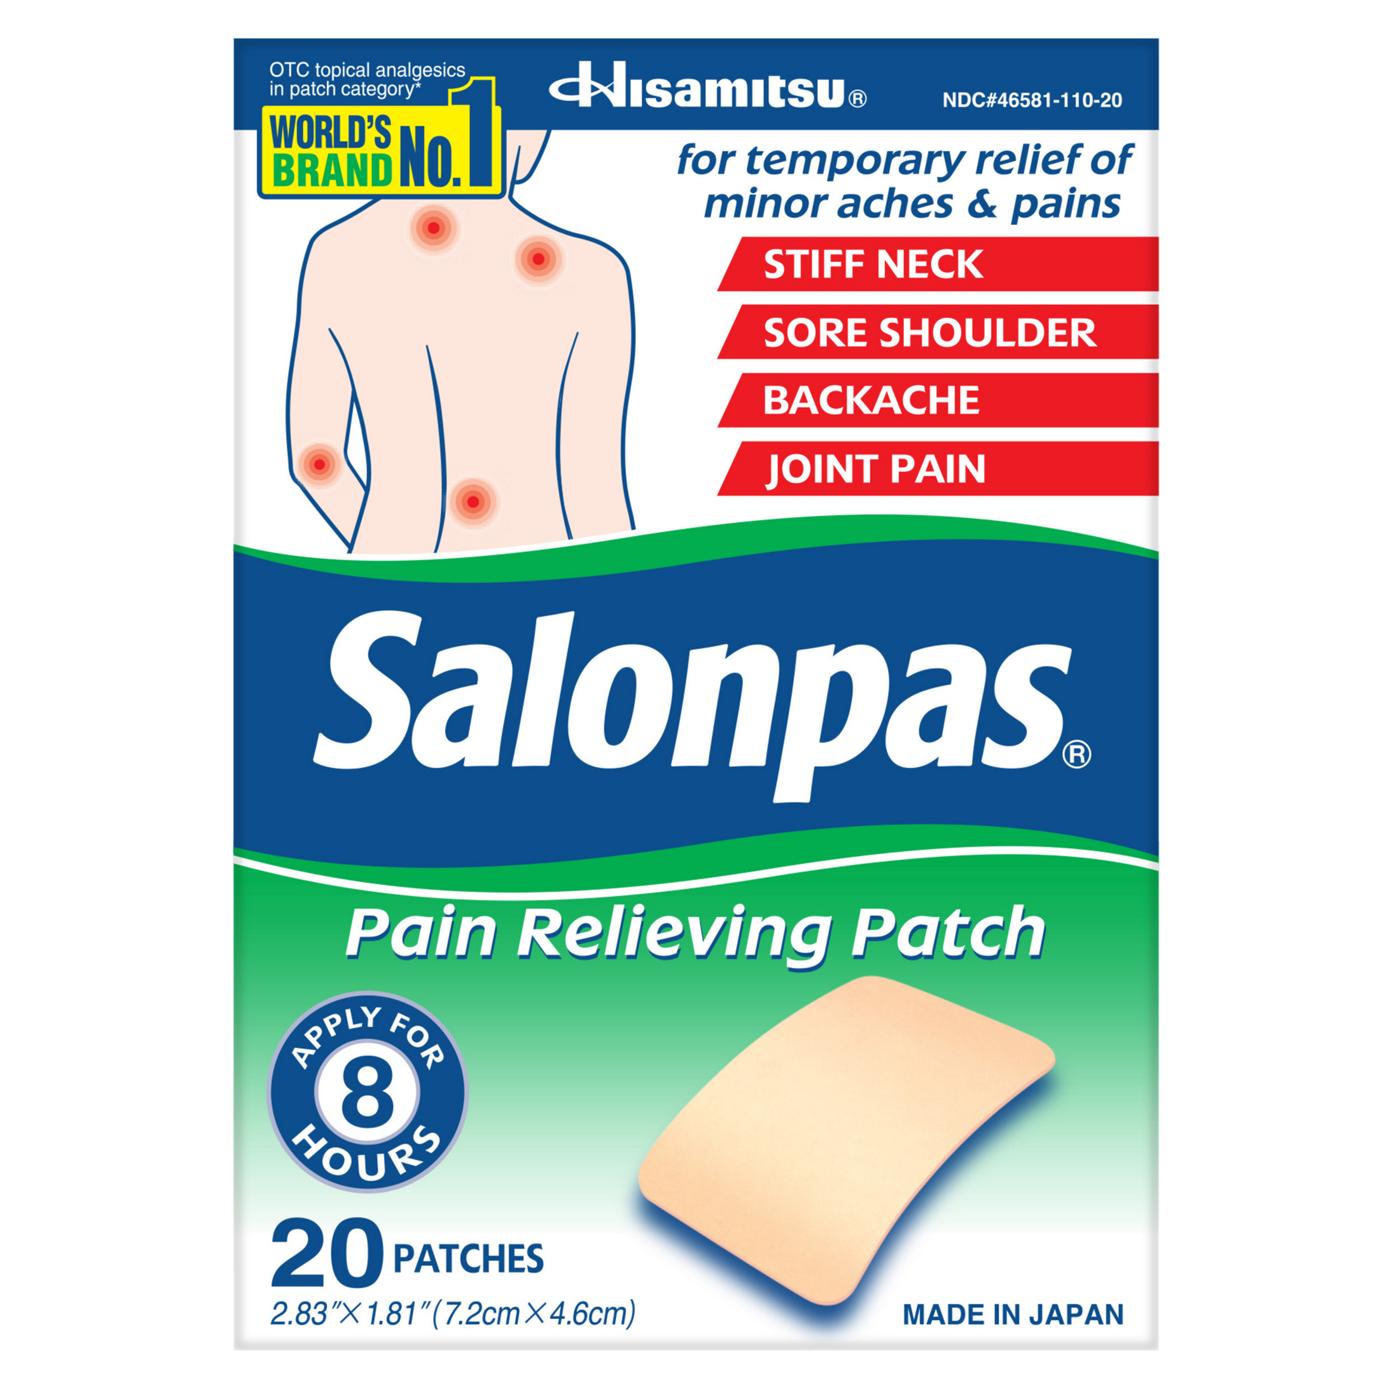 Salonpas Pain Relieving Patch; image 1 of 5